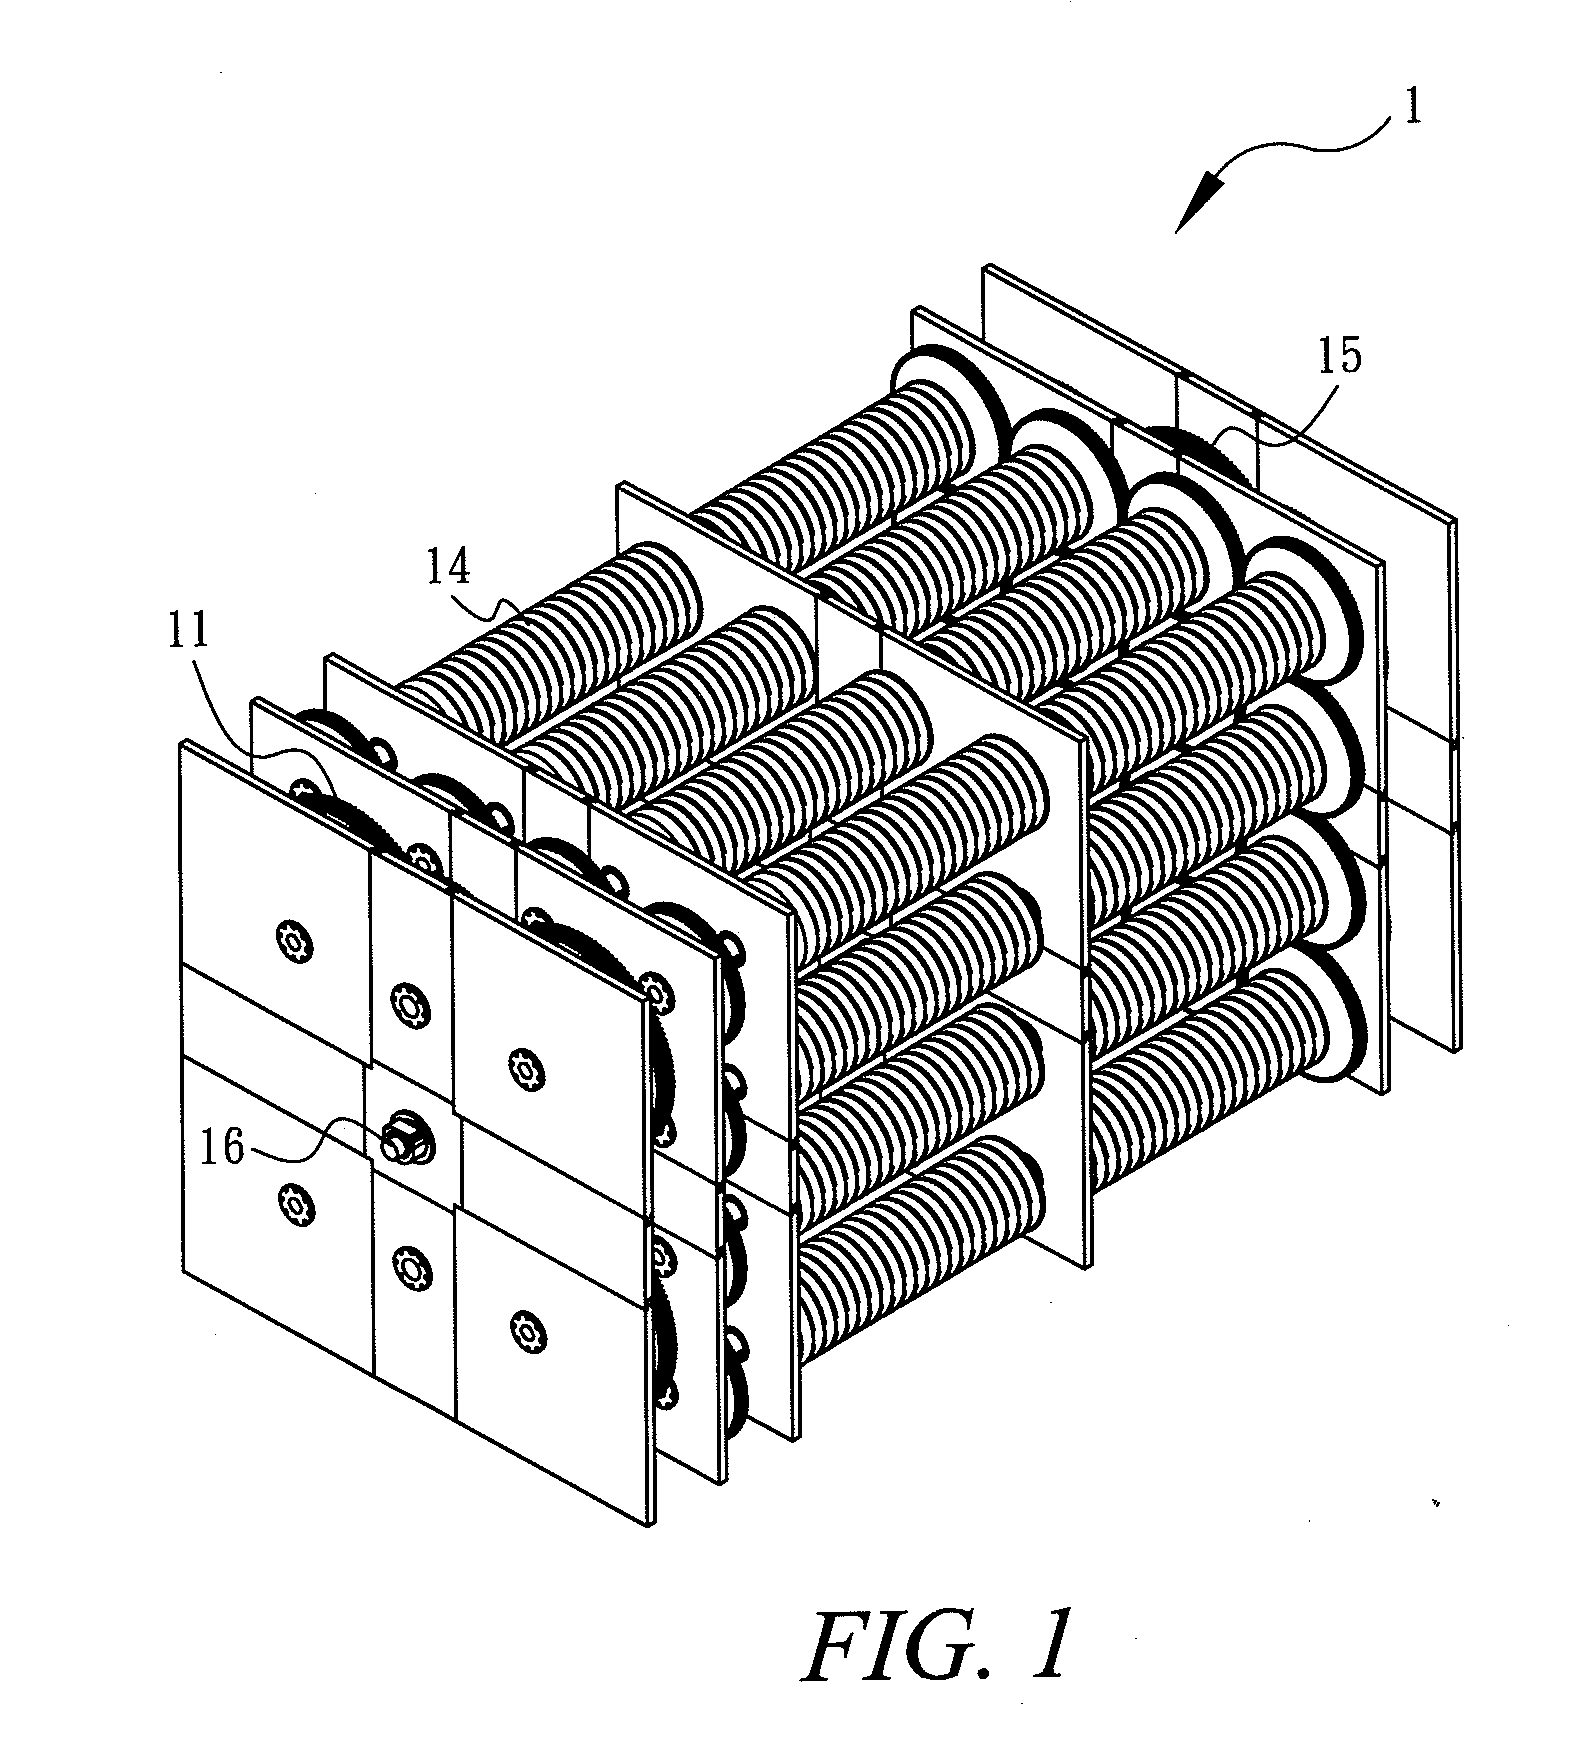 Energy storing device in which energy is stored through spring torsion